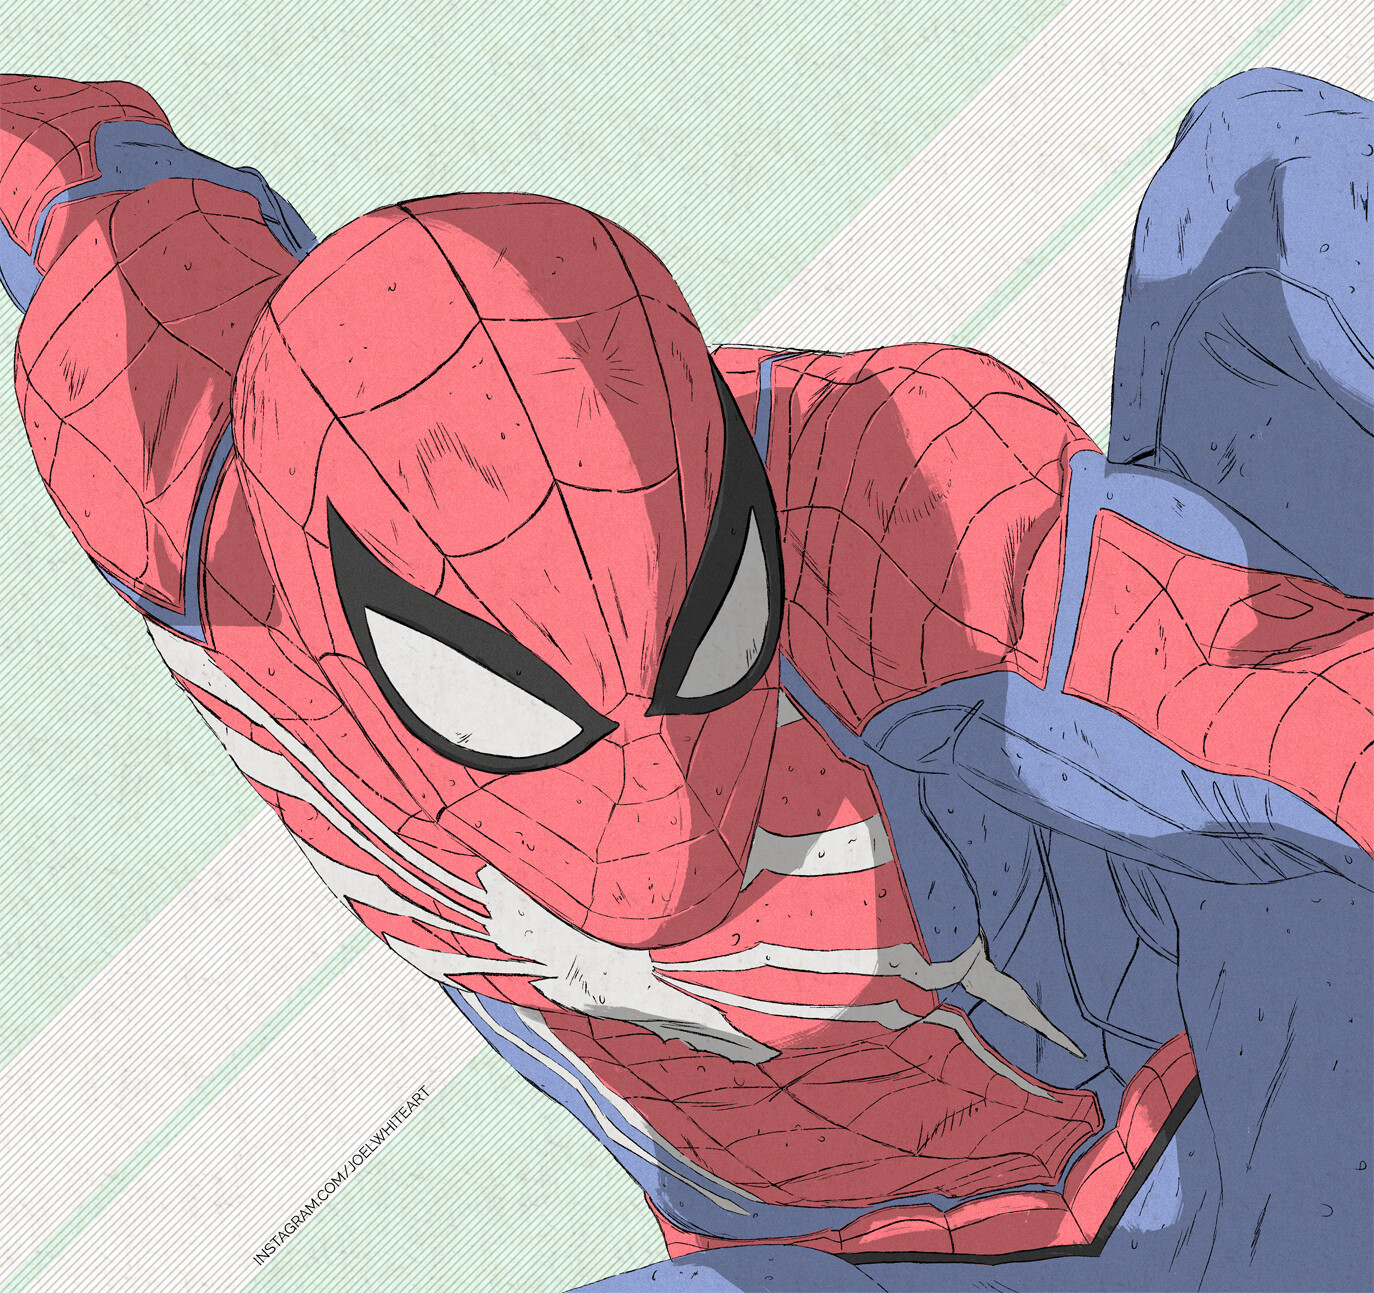 Concept Design of Spidermanfor fun  colors inspired by  mohammedagbadi spiderman avengers marvelcomics conce  Hombre araña  animado Marvel Superhéroes